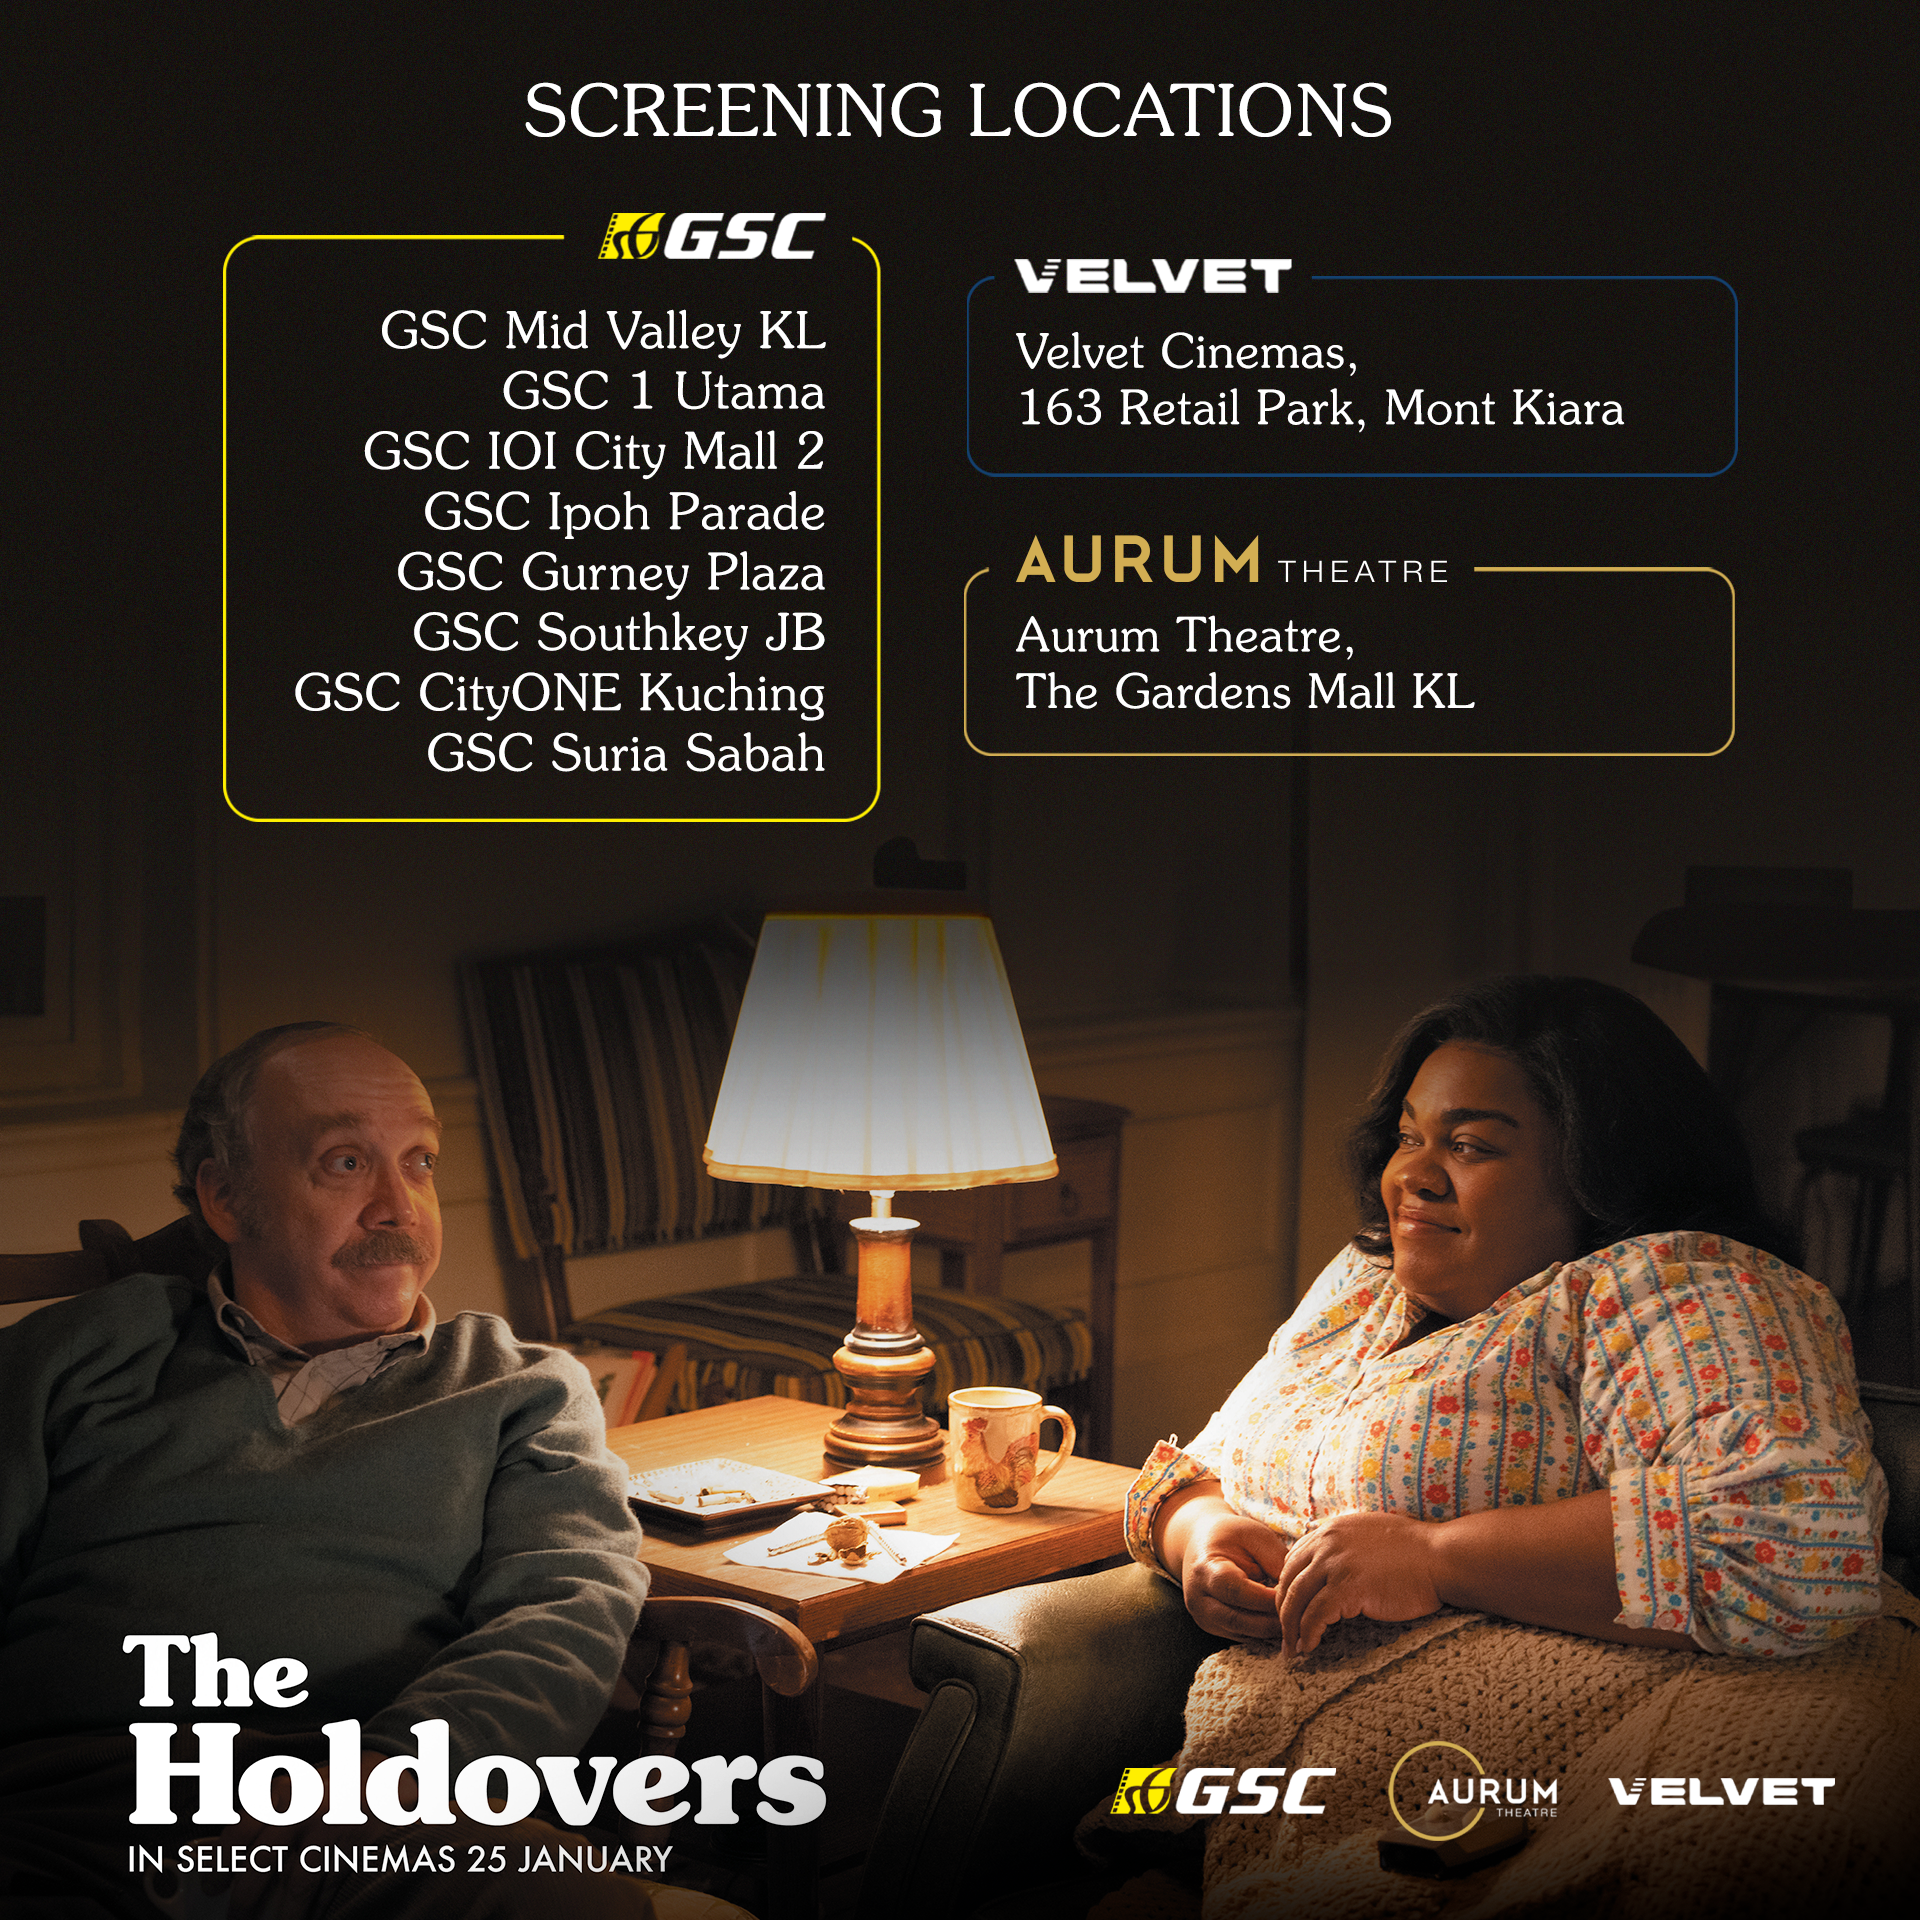 The-holdovers-cinema-locations